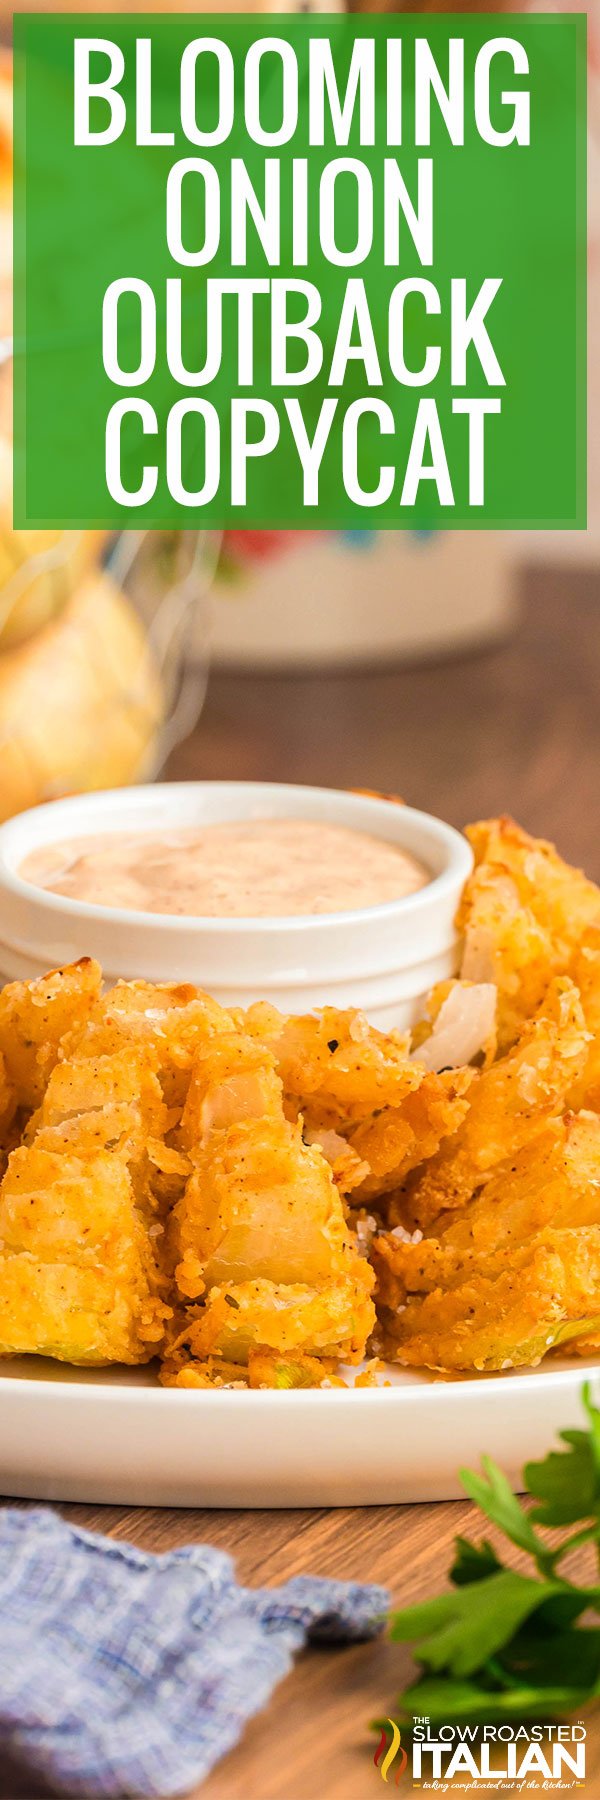 Blooming Onion Outback Copycat - PIN